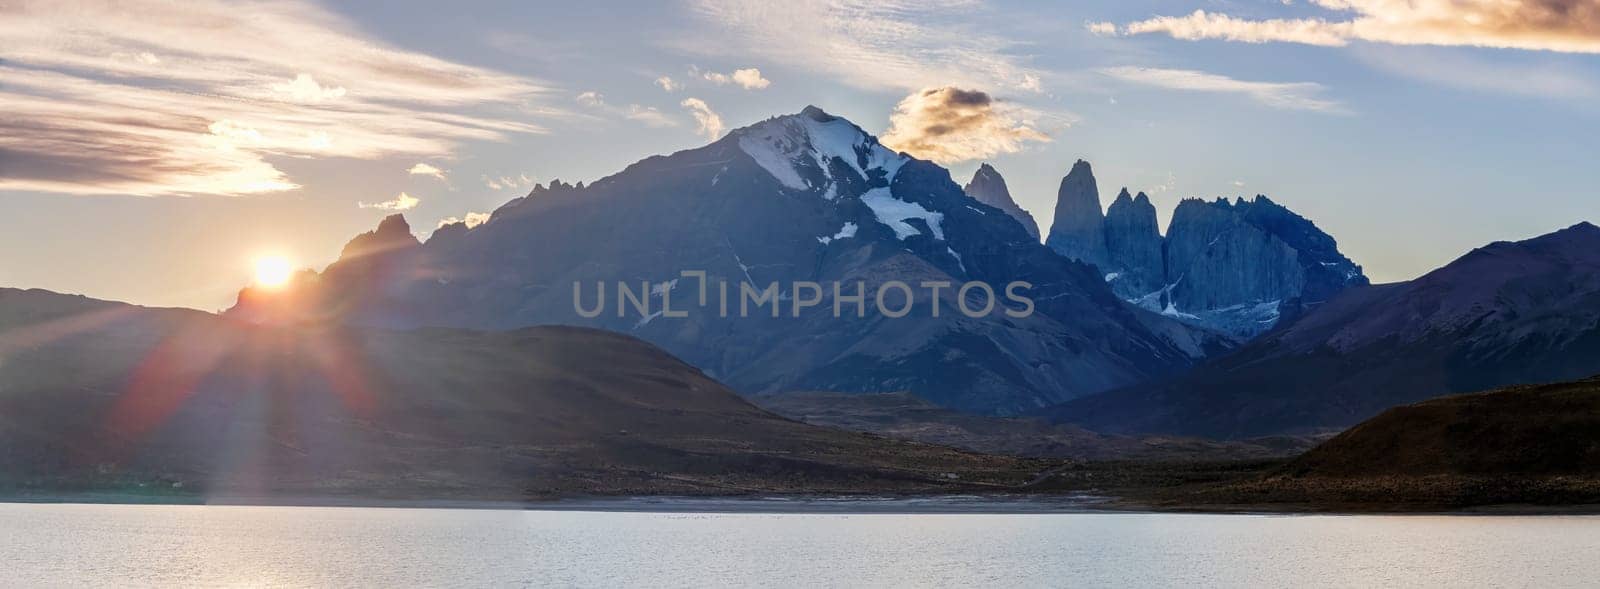 Sunrise in Patagonia with a tranquil lake and snow-capped mountains in the background, Torres del Paine sunset